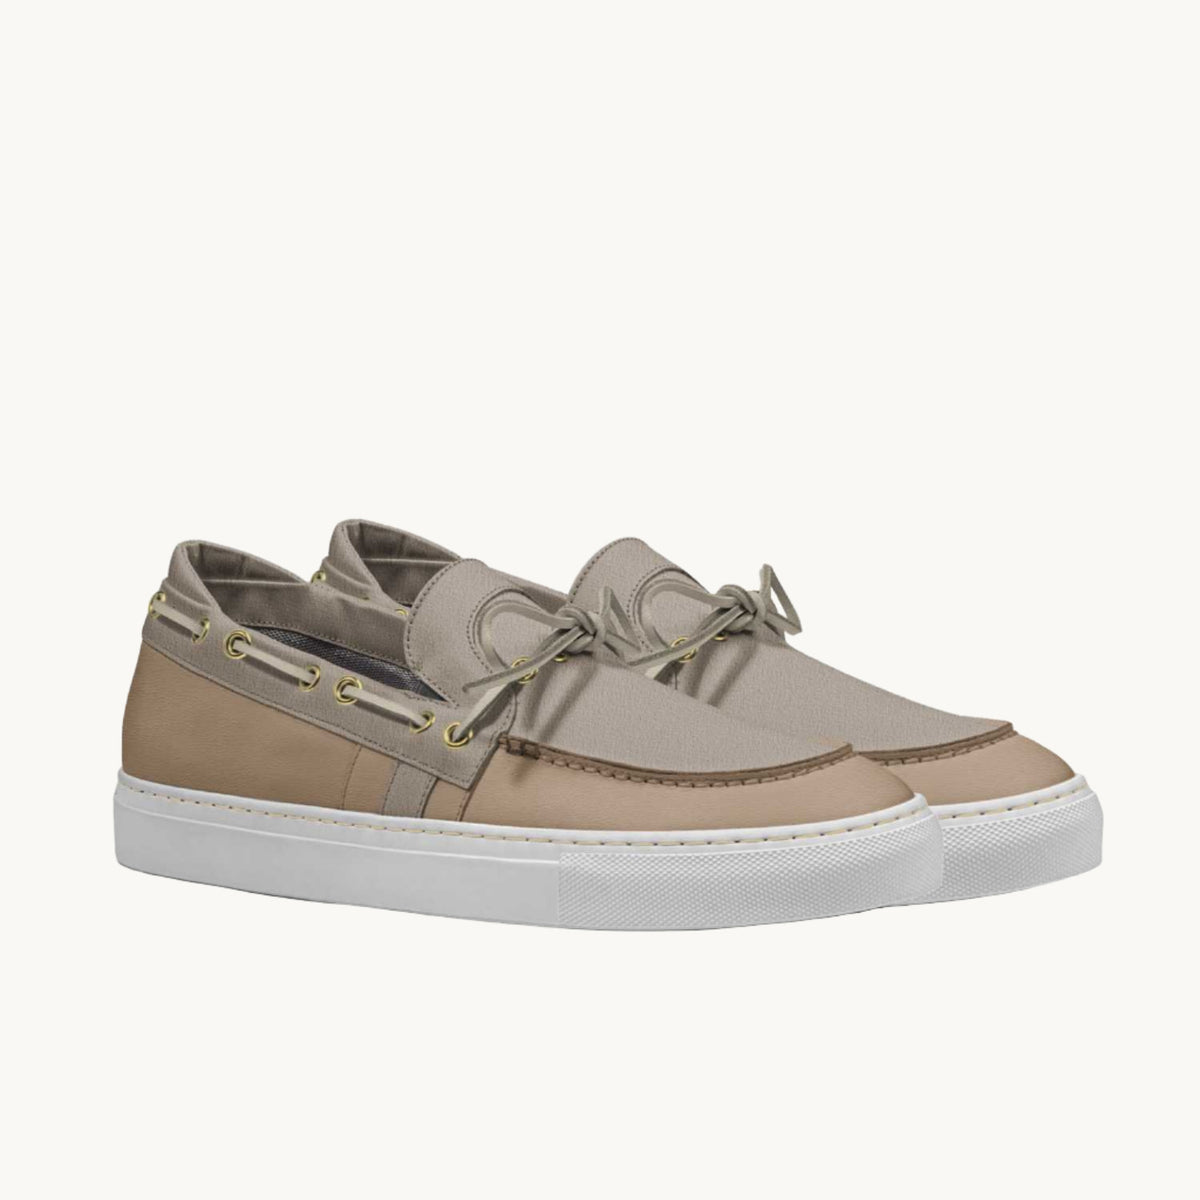 Side view of beige boat loafer sneakers with laces on the side. 